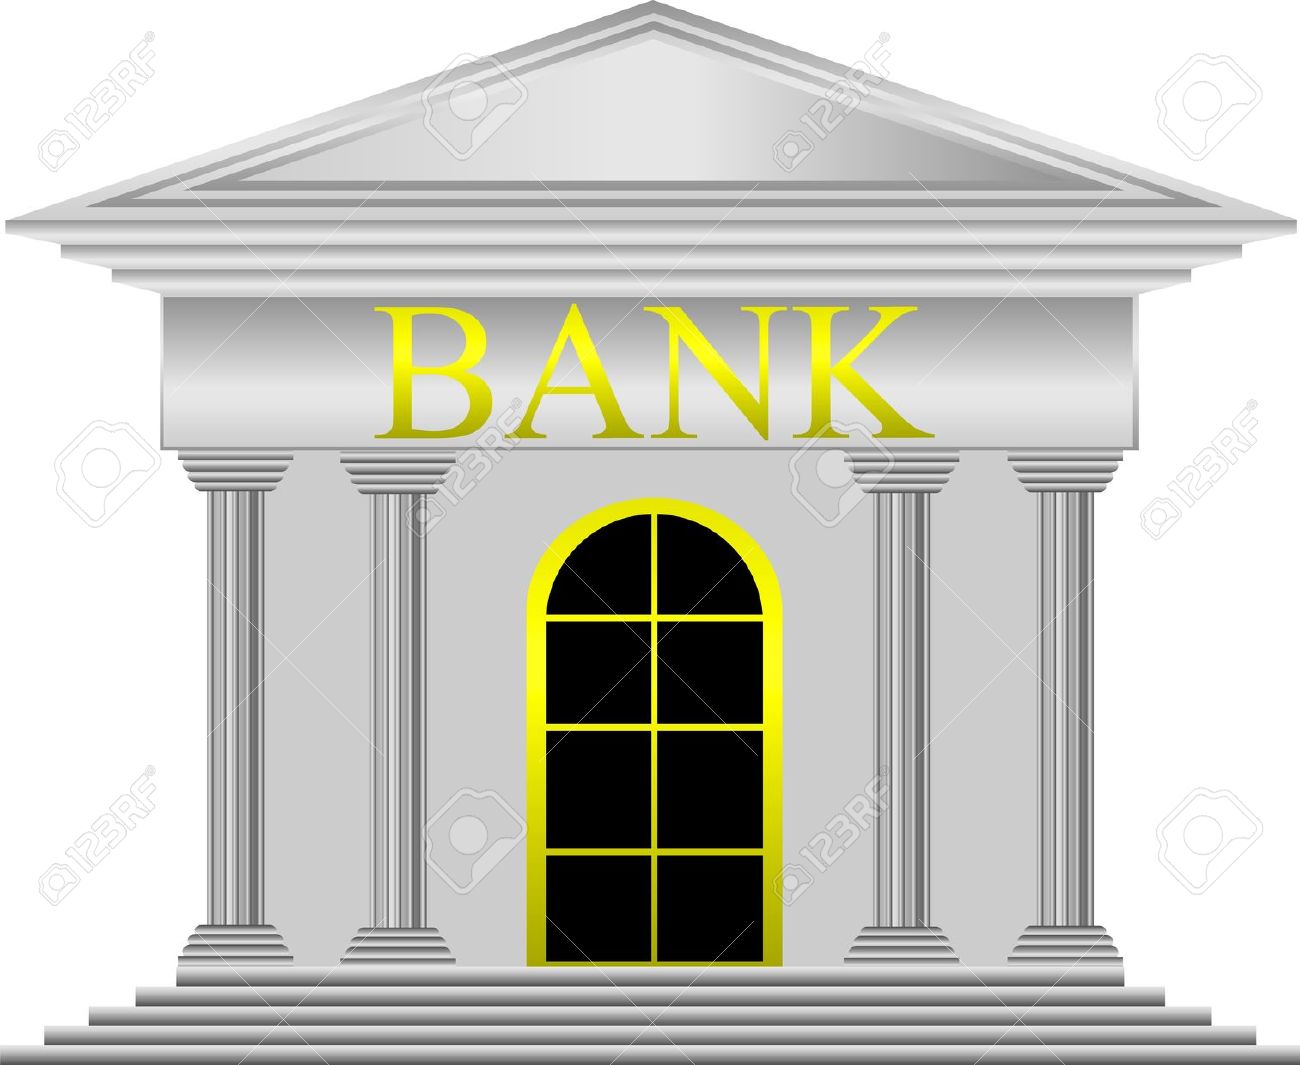 clipart of bank - photo #18